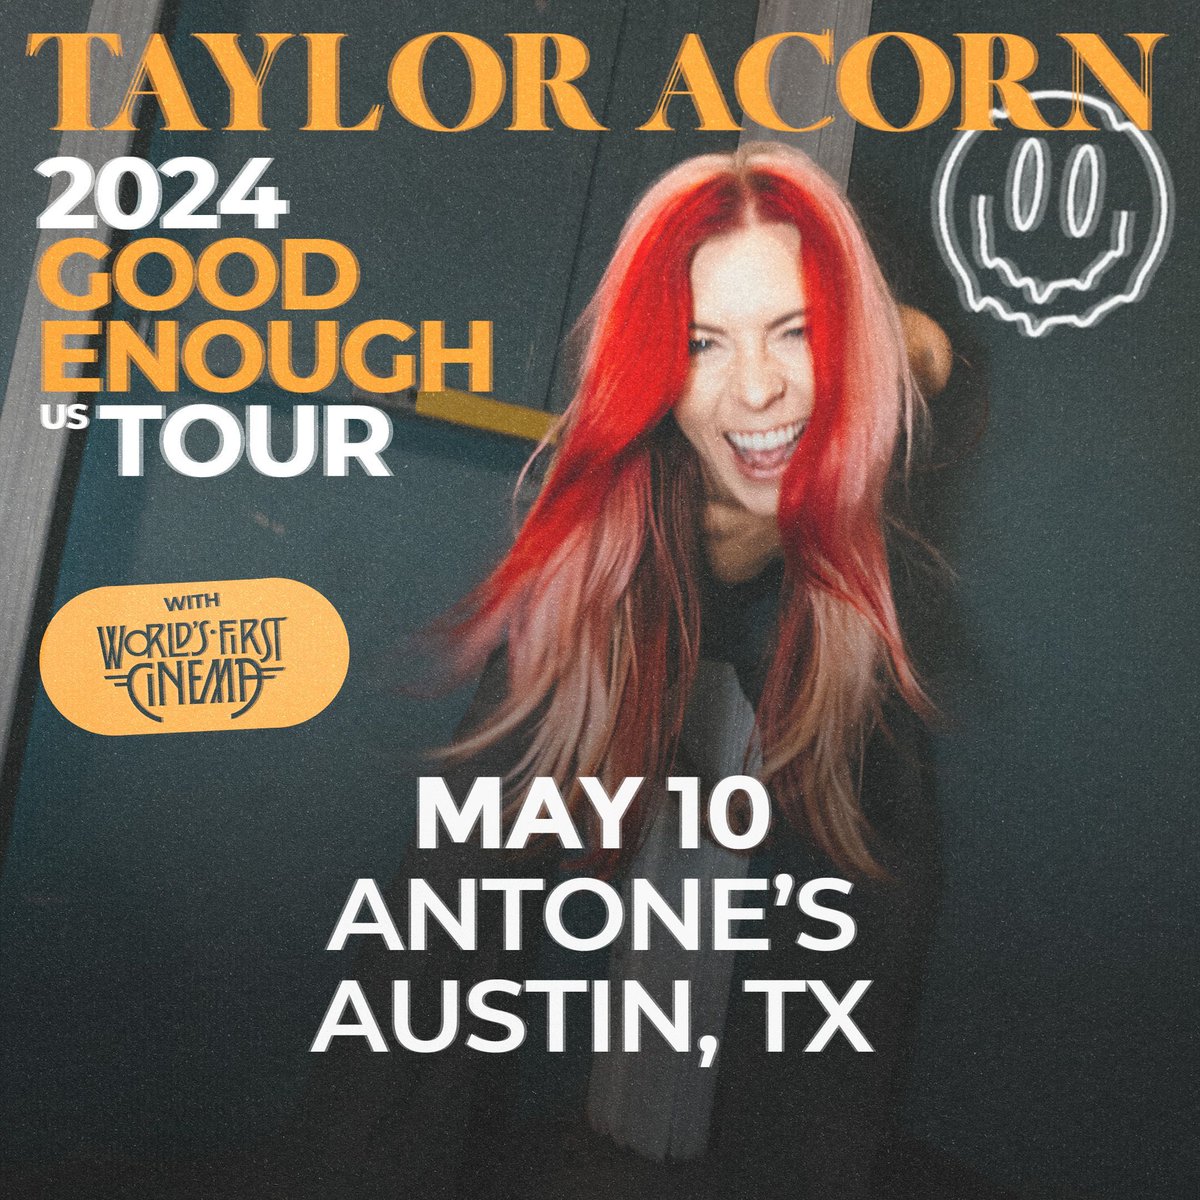 Taylor Acorn is bringing her Good Enough Tour to Antone’s on May 10! With World’s First Cinema kicking off the night. Tickets are still available online now ➡️ buff.ly/3xrkJWR